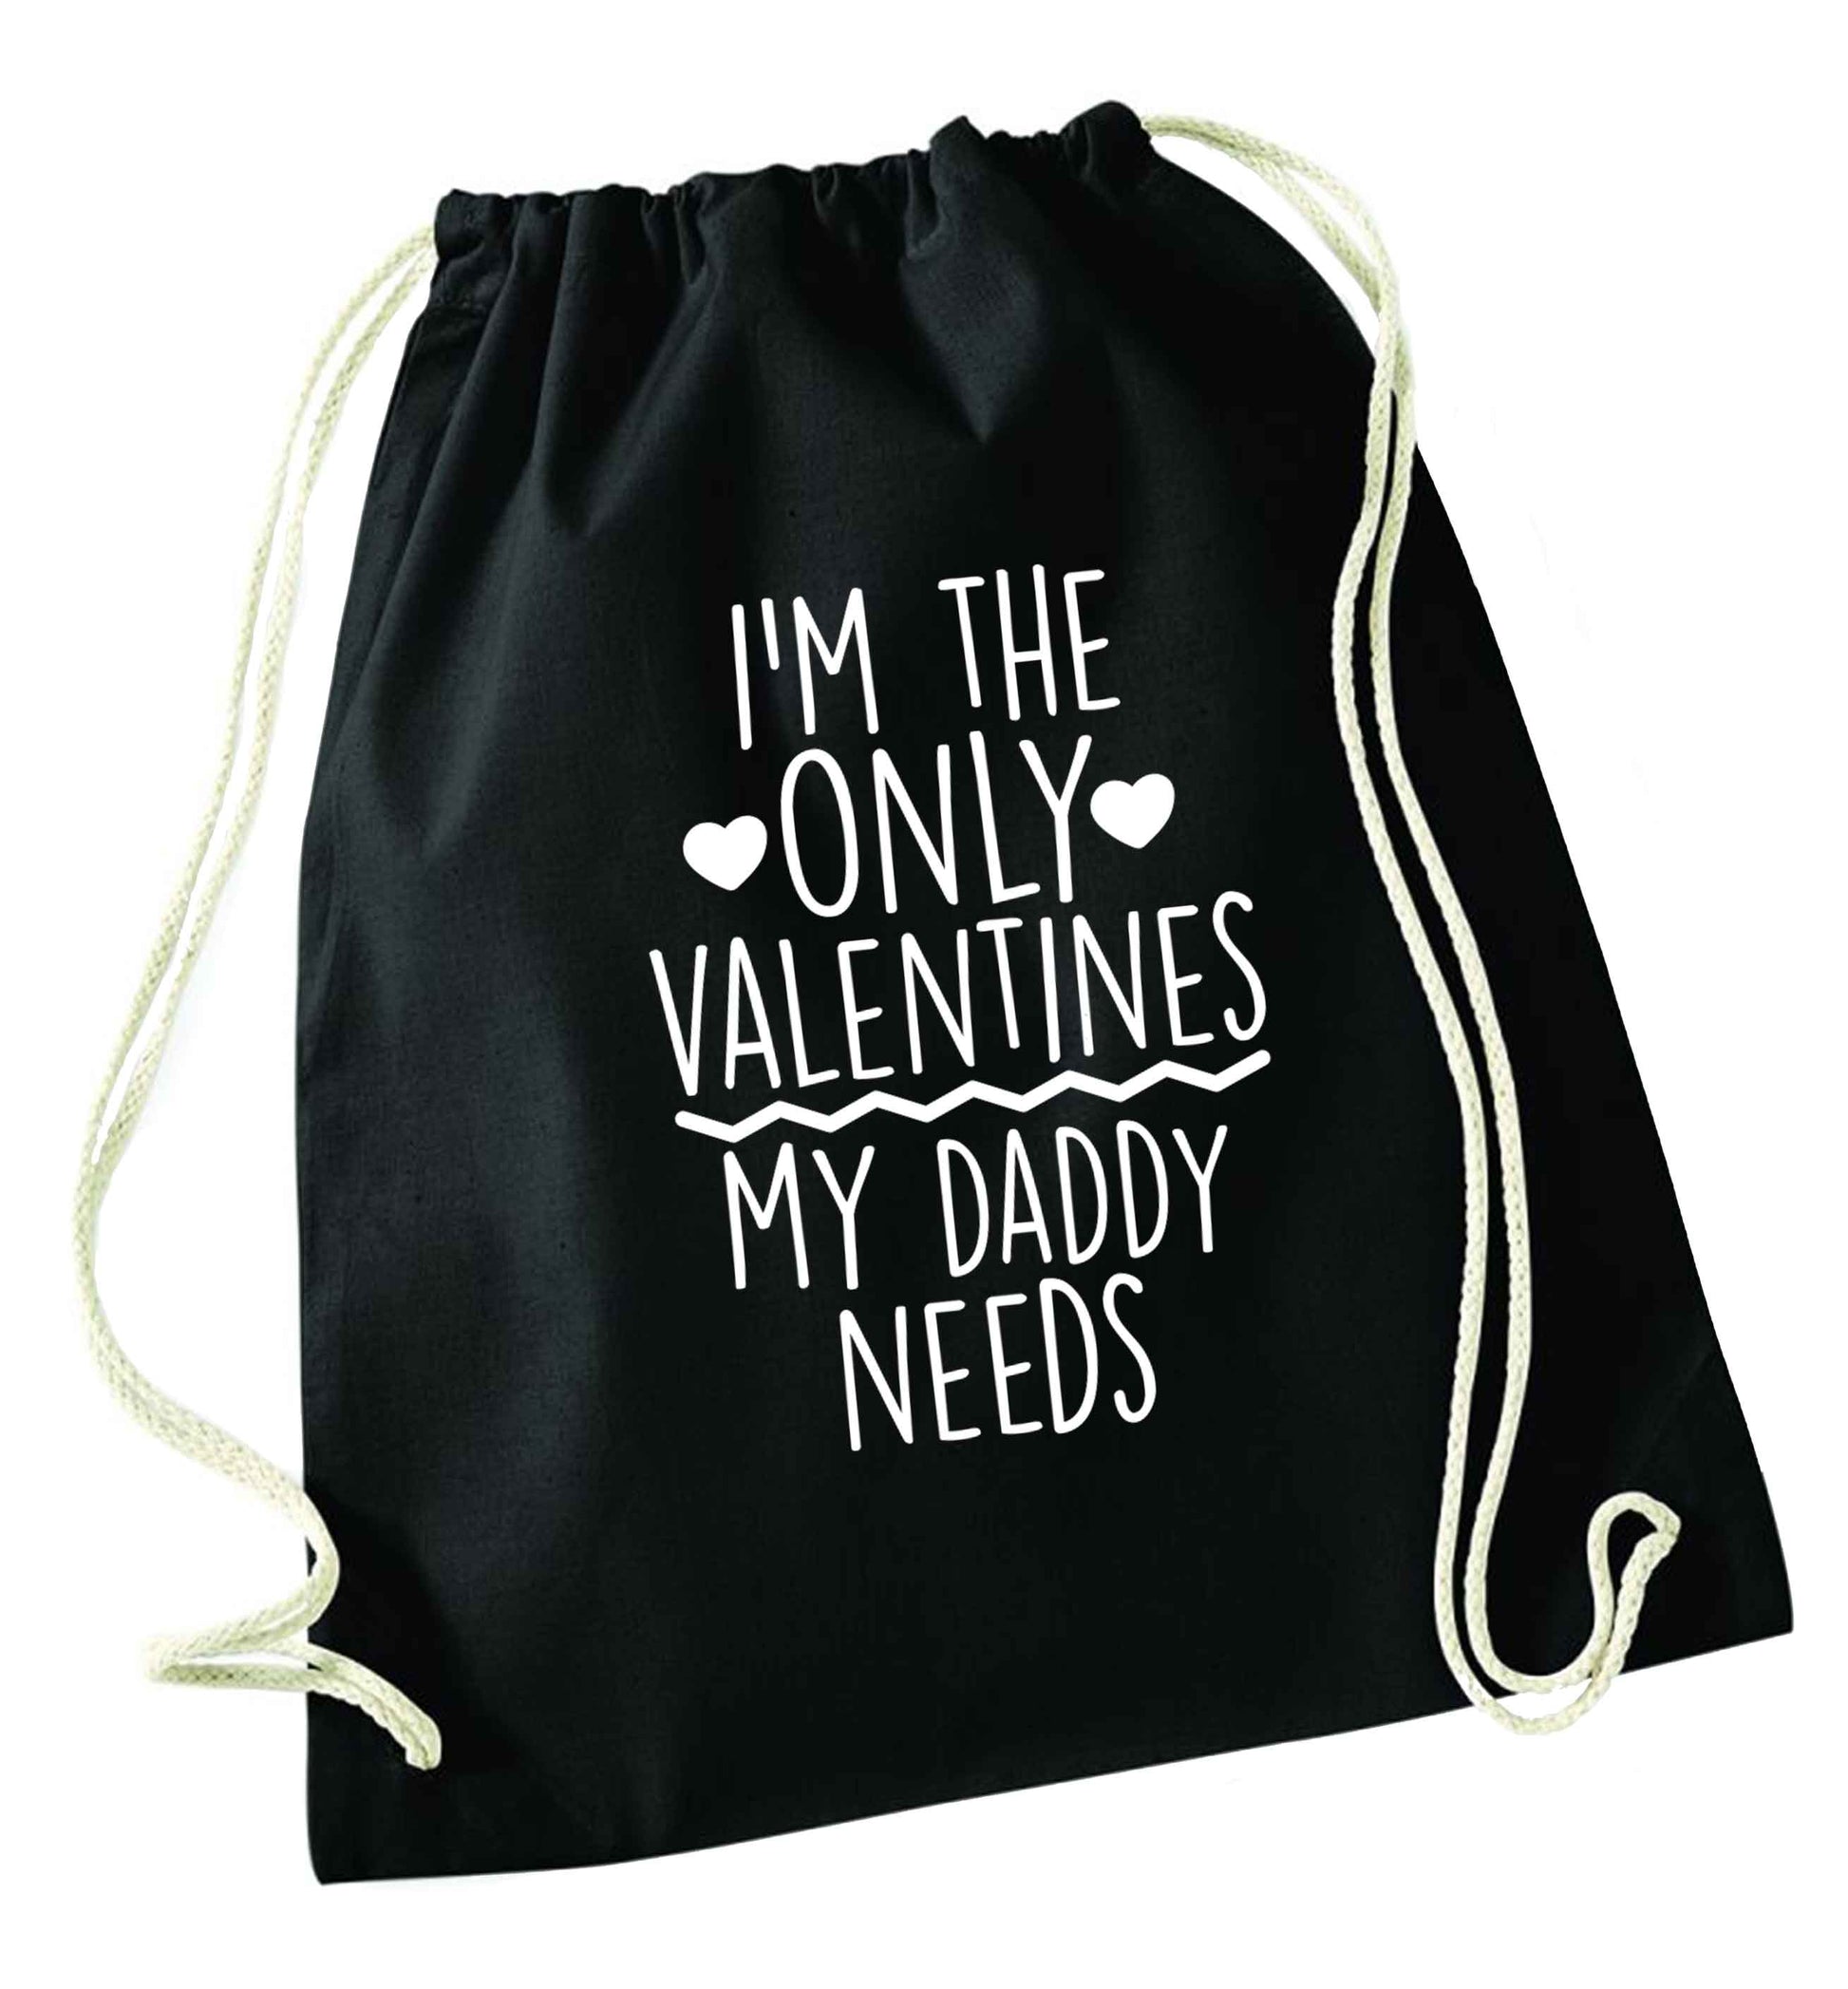 I'm the only valentines my daddy needs black drawstring bag